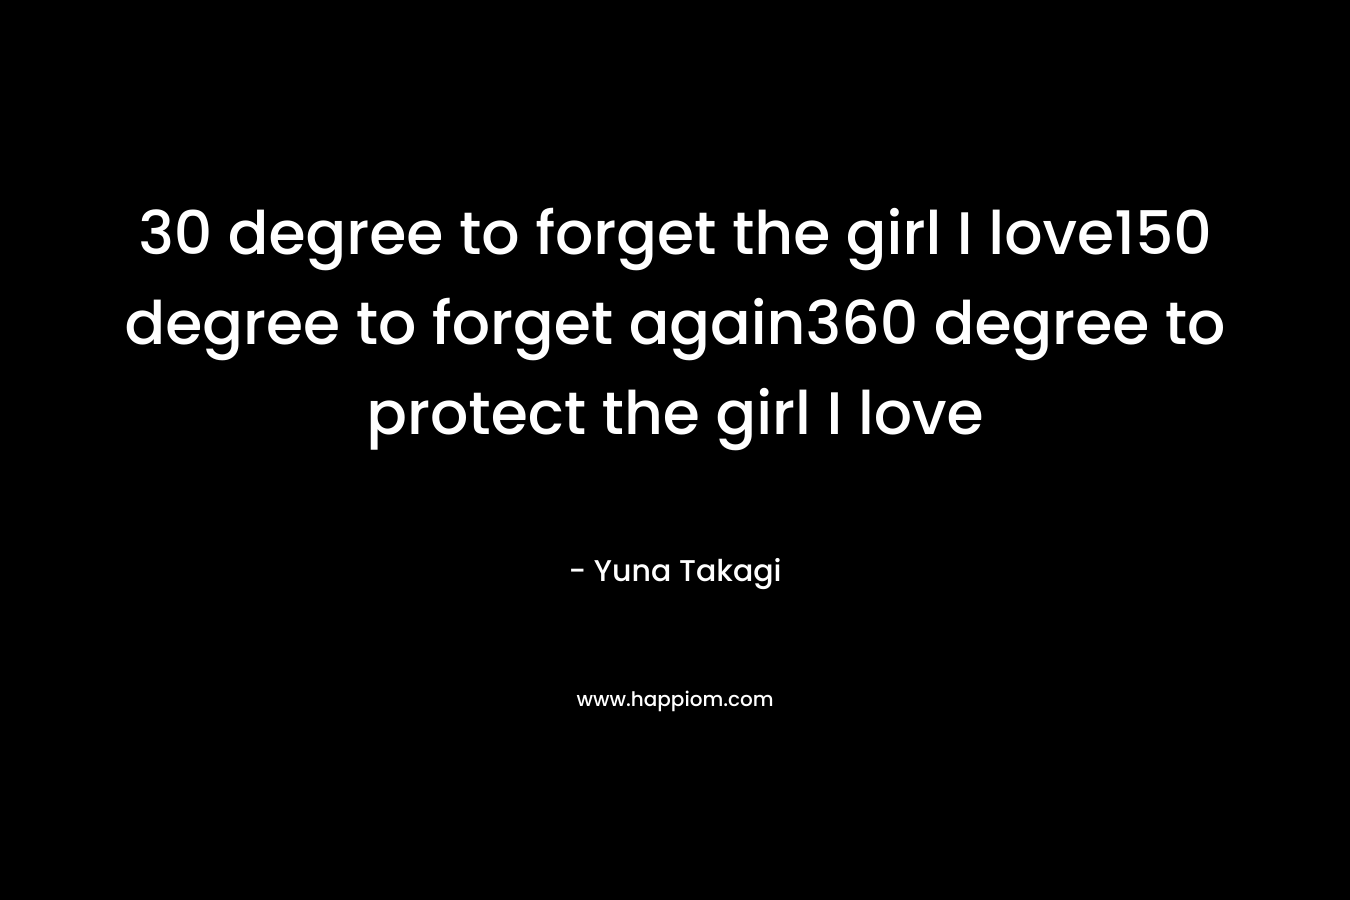 30 degree to forget the girl I love150 degree to forget again360 degree to protect the girl I love – Yuna Takagi